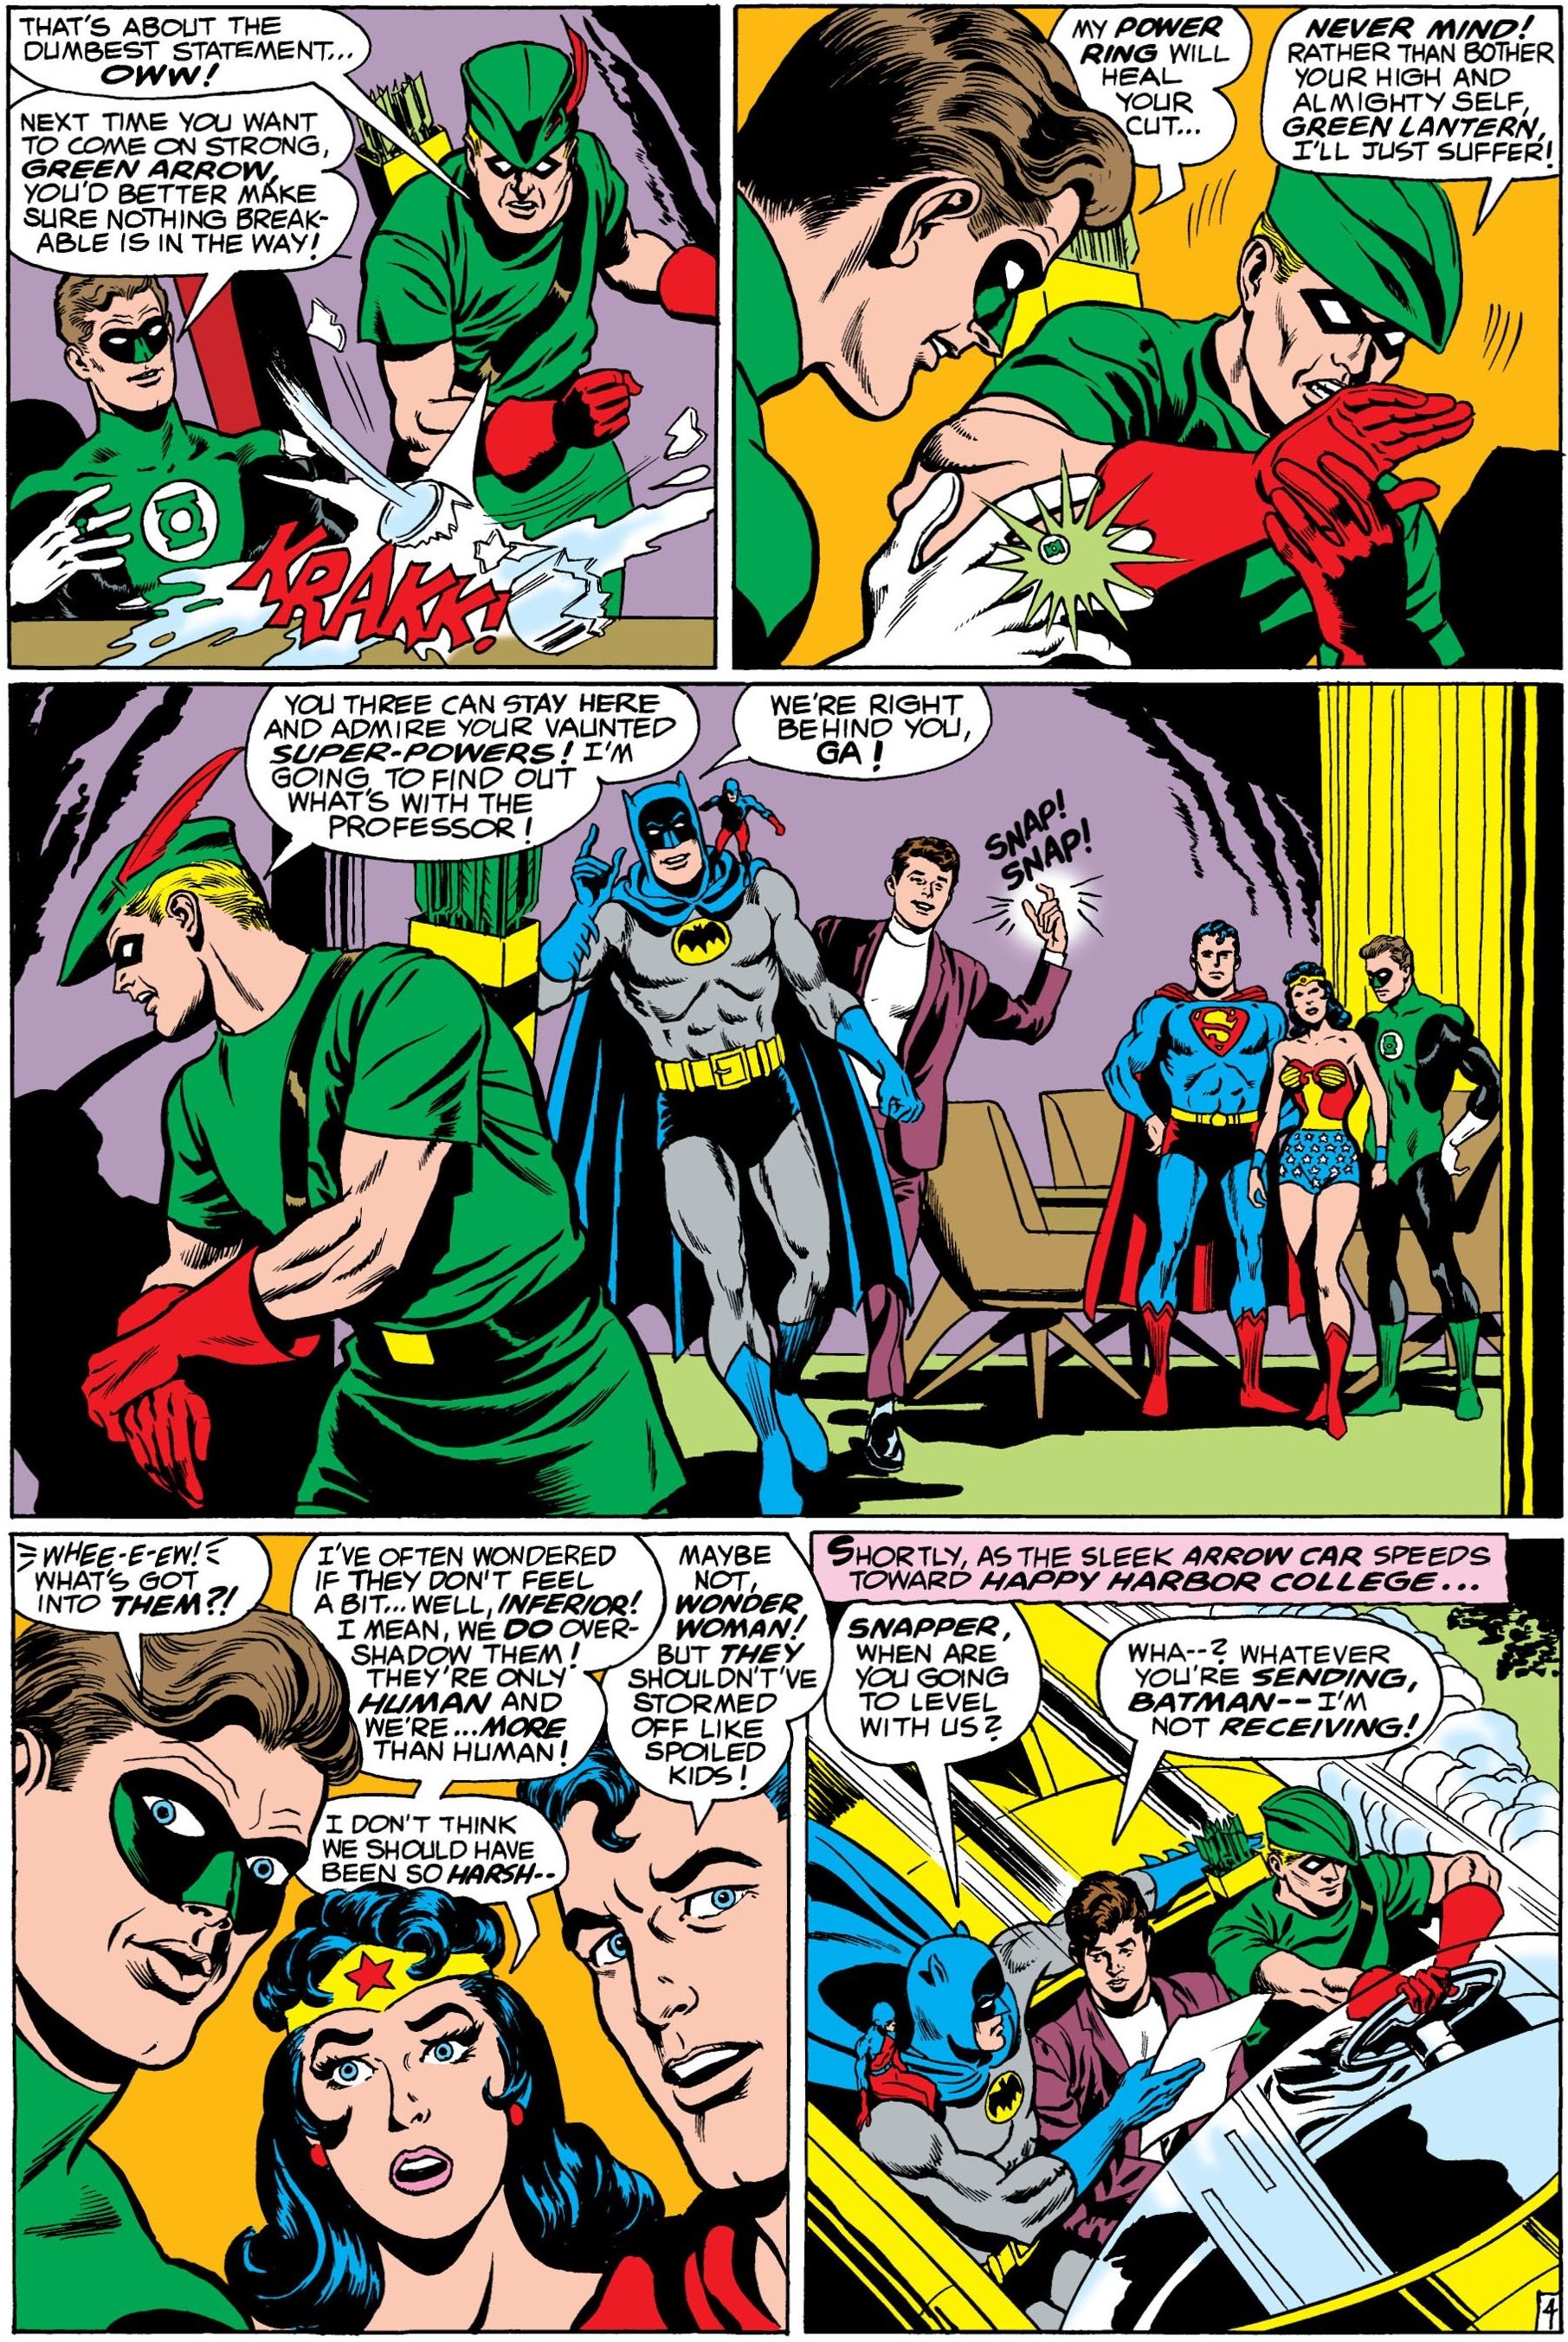 Green Lantern and the other heroes are different from their non-powered teammates.